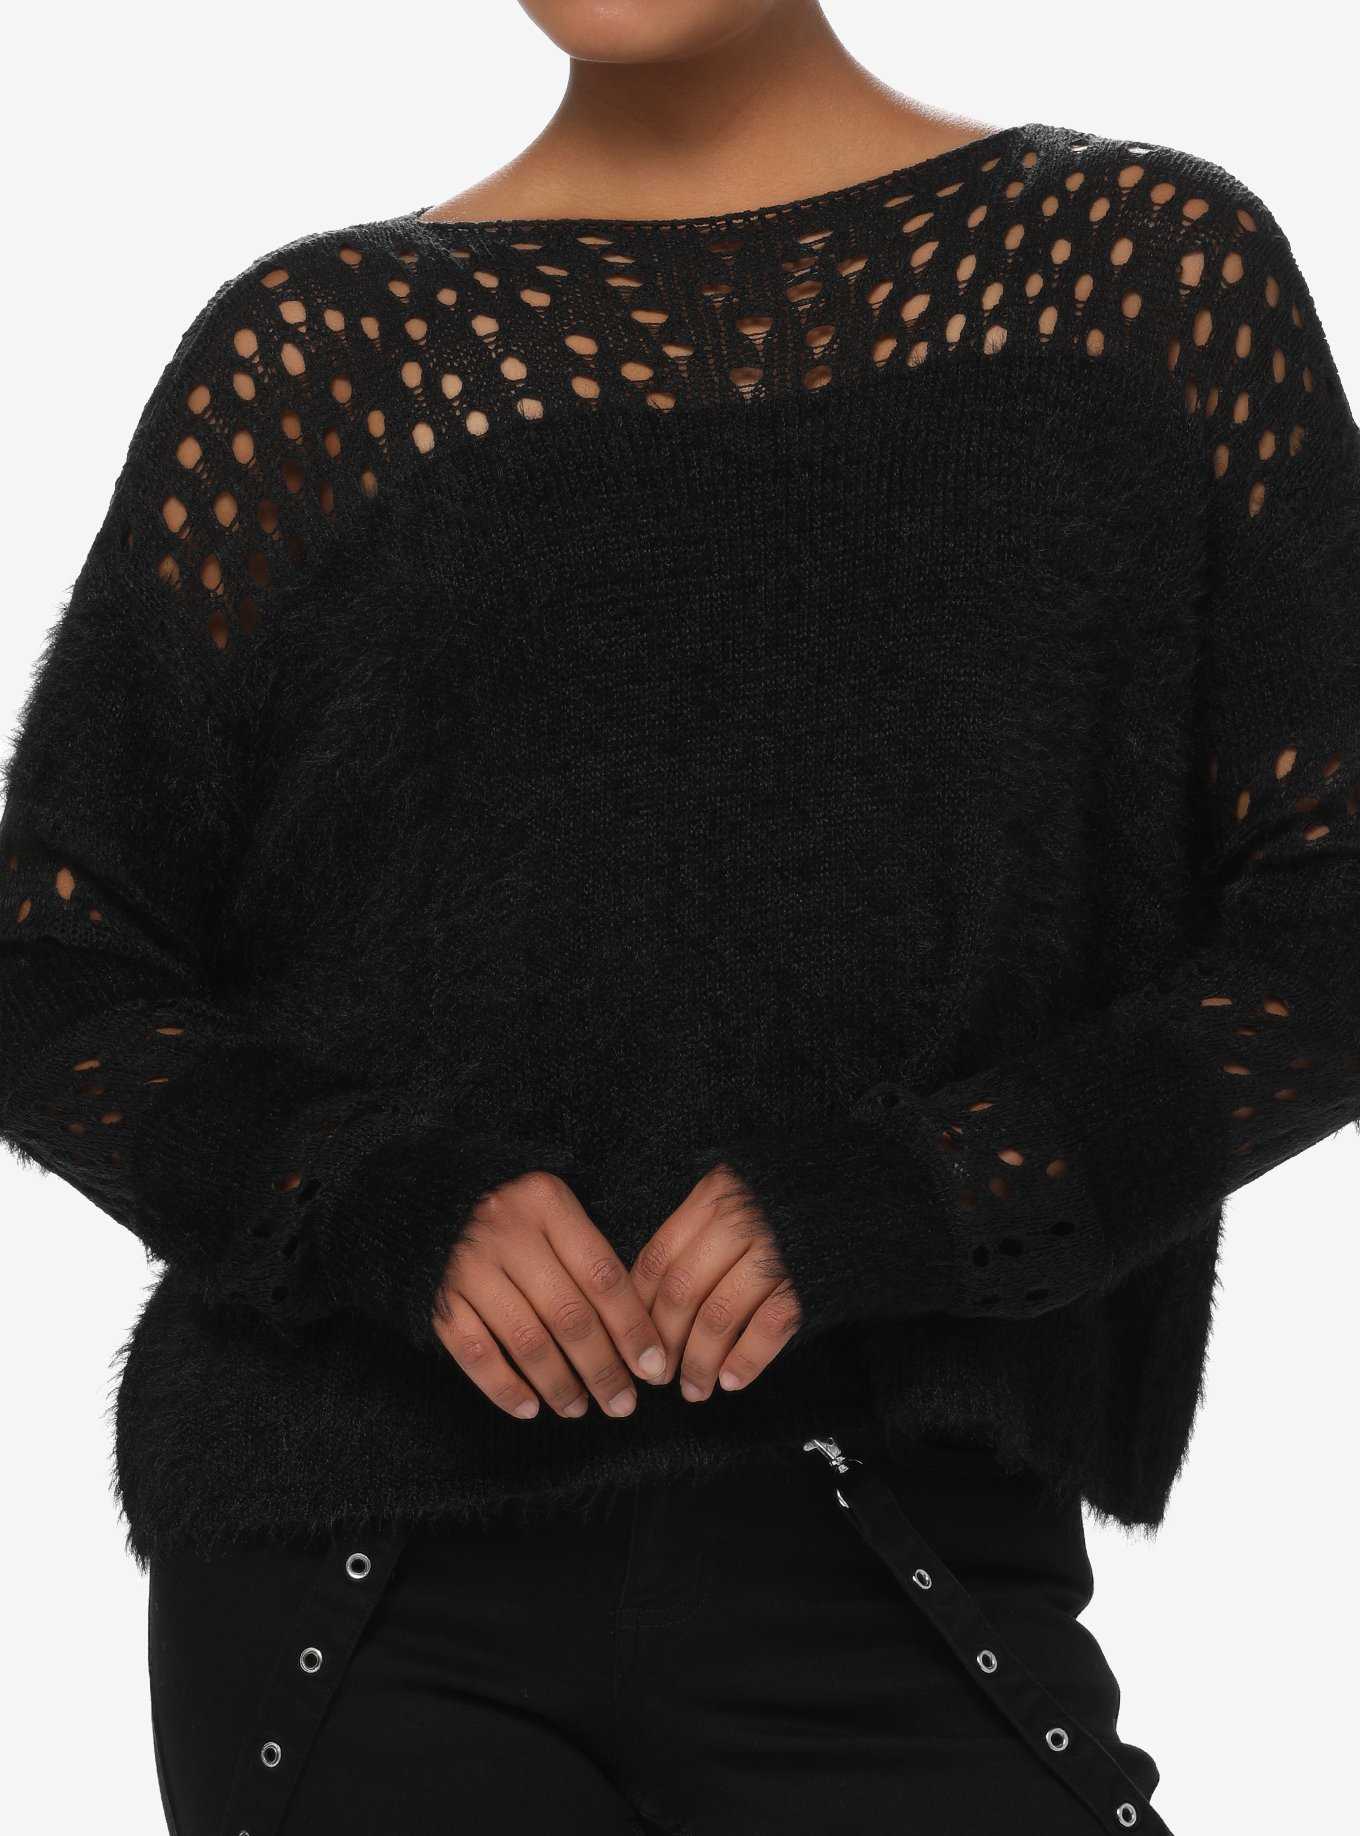 Social Collision Fuzzy Black Striped Fishnet Girls Knit Sweater, , hi-res